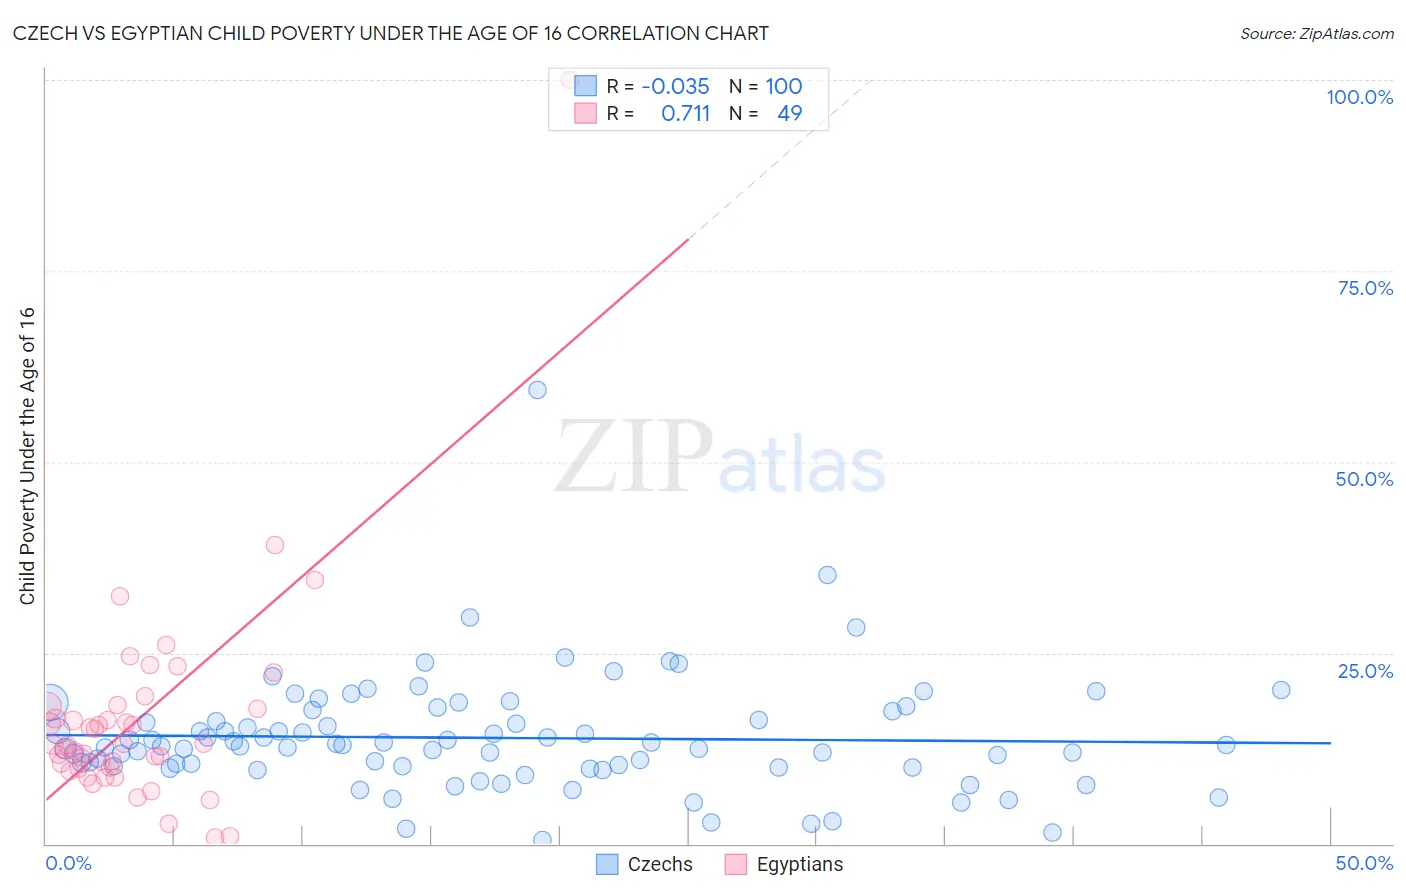 Czech vs Egyptian Child Poverty Under the Age of 16